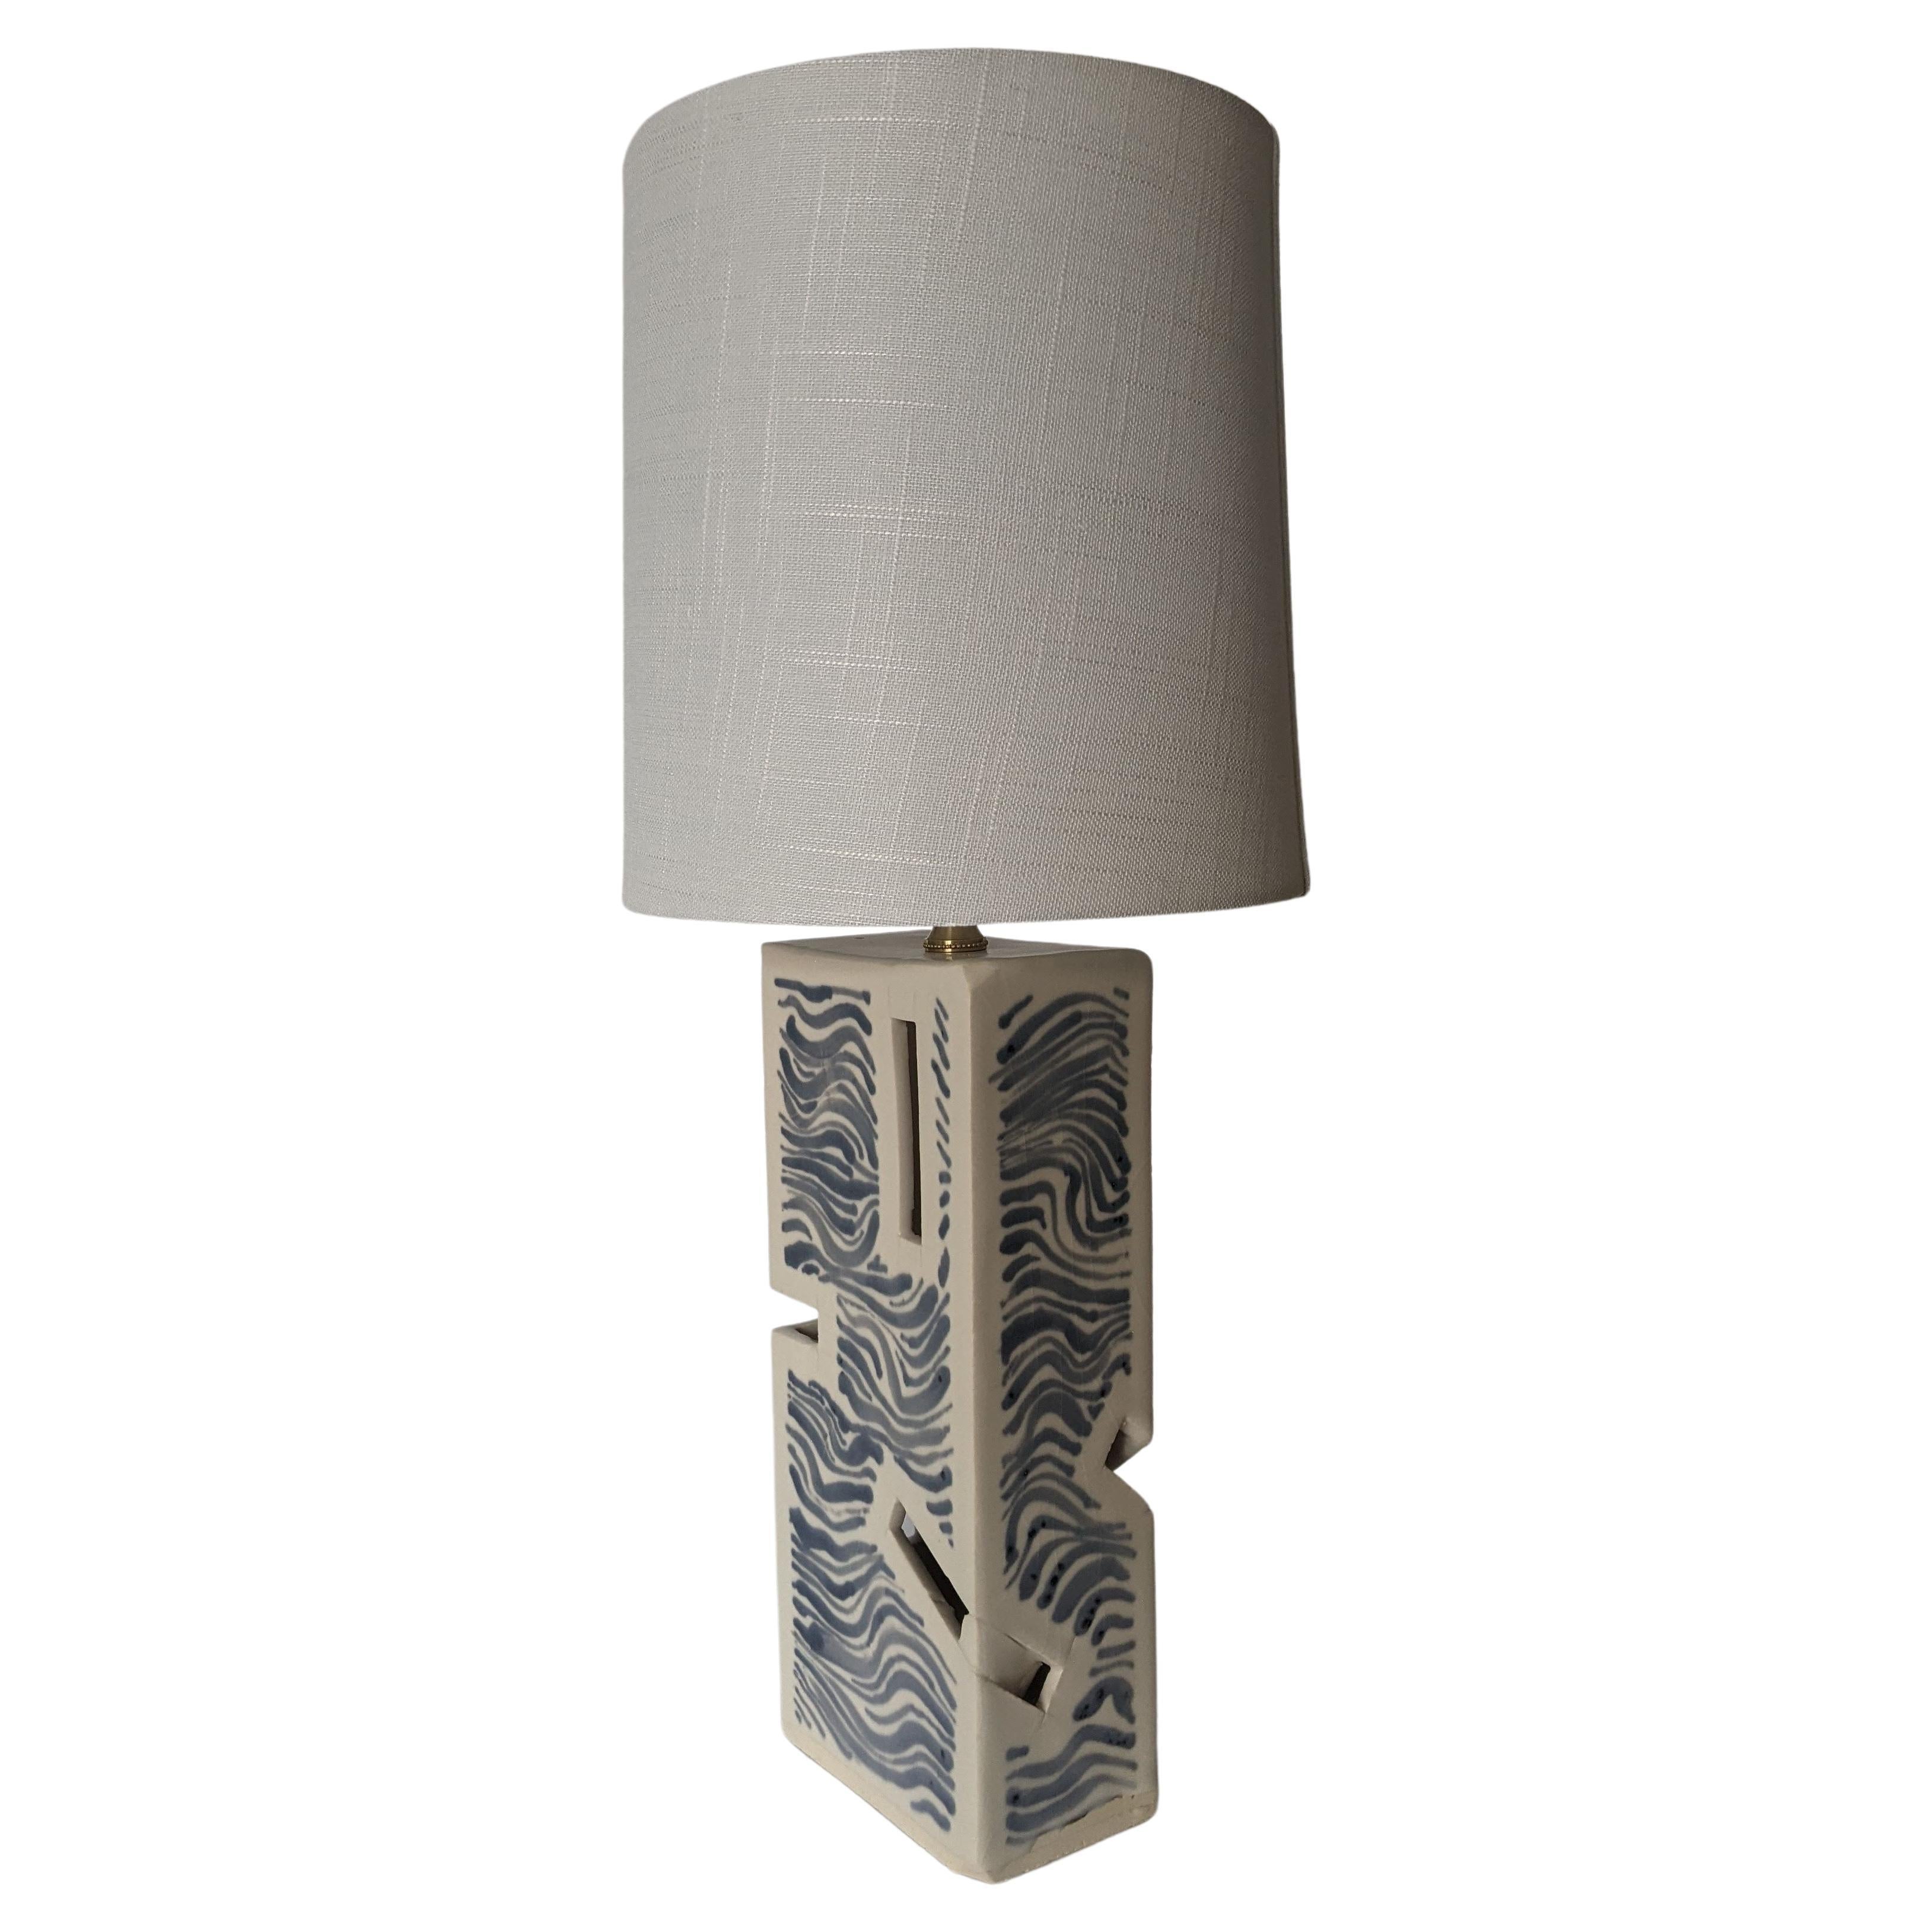 Customizable Hand-Painted Ceramic "Random Openings" Lamp by James Hicks For Sale